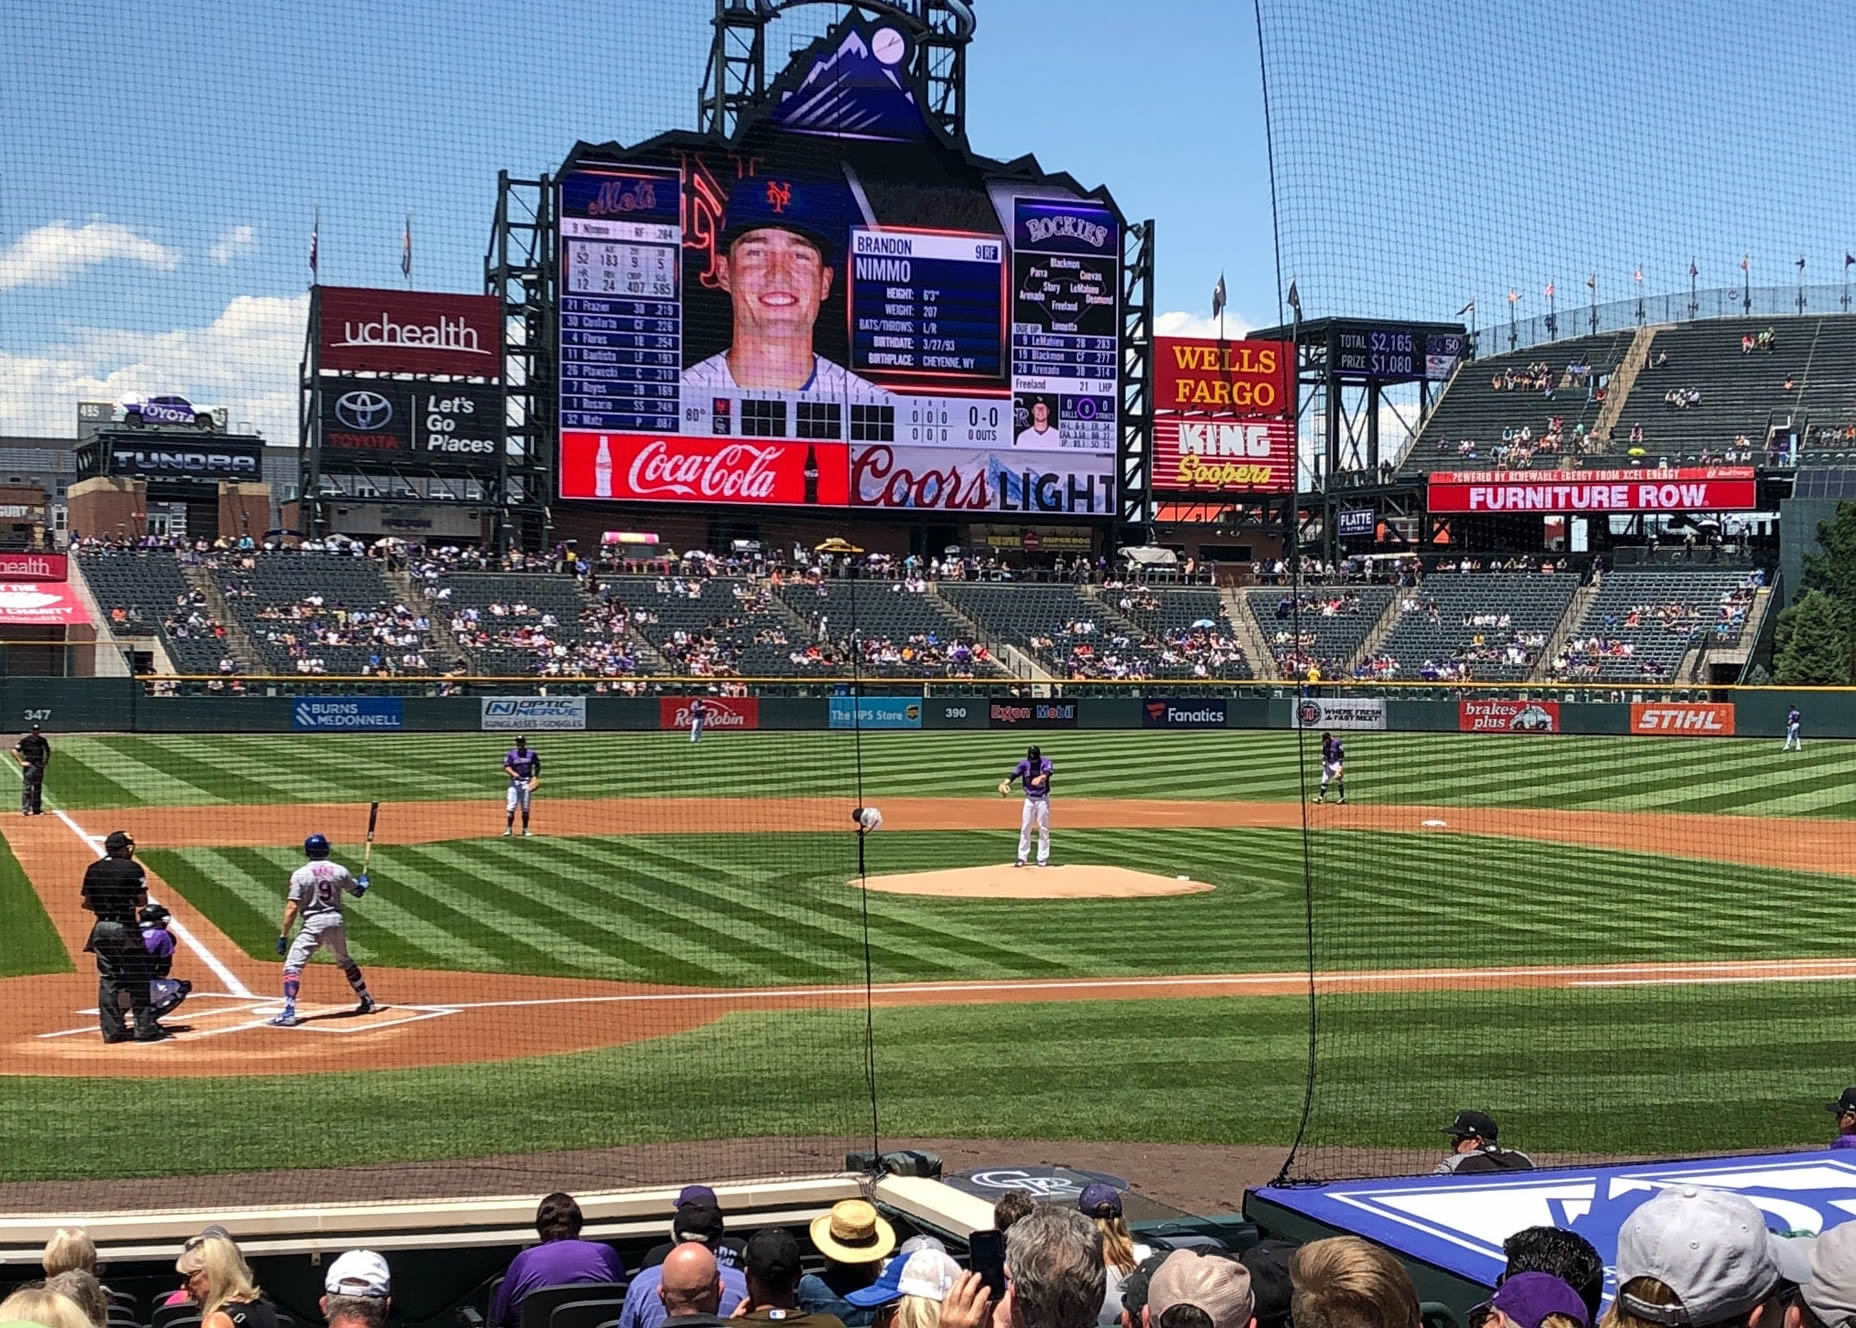 section 126, row 8 seat view  - coors field